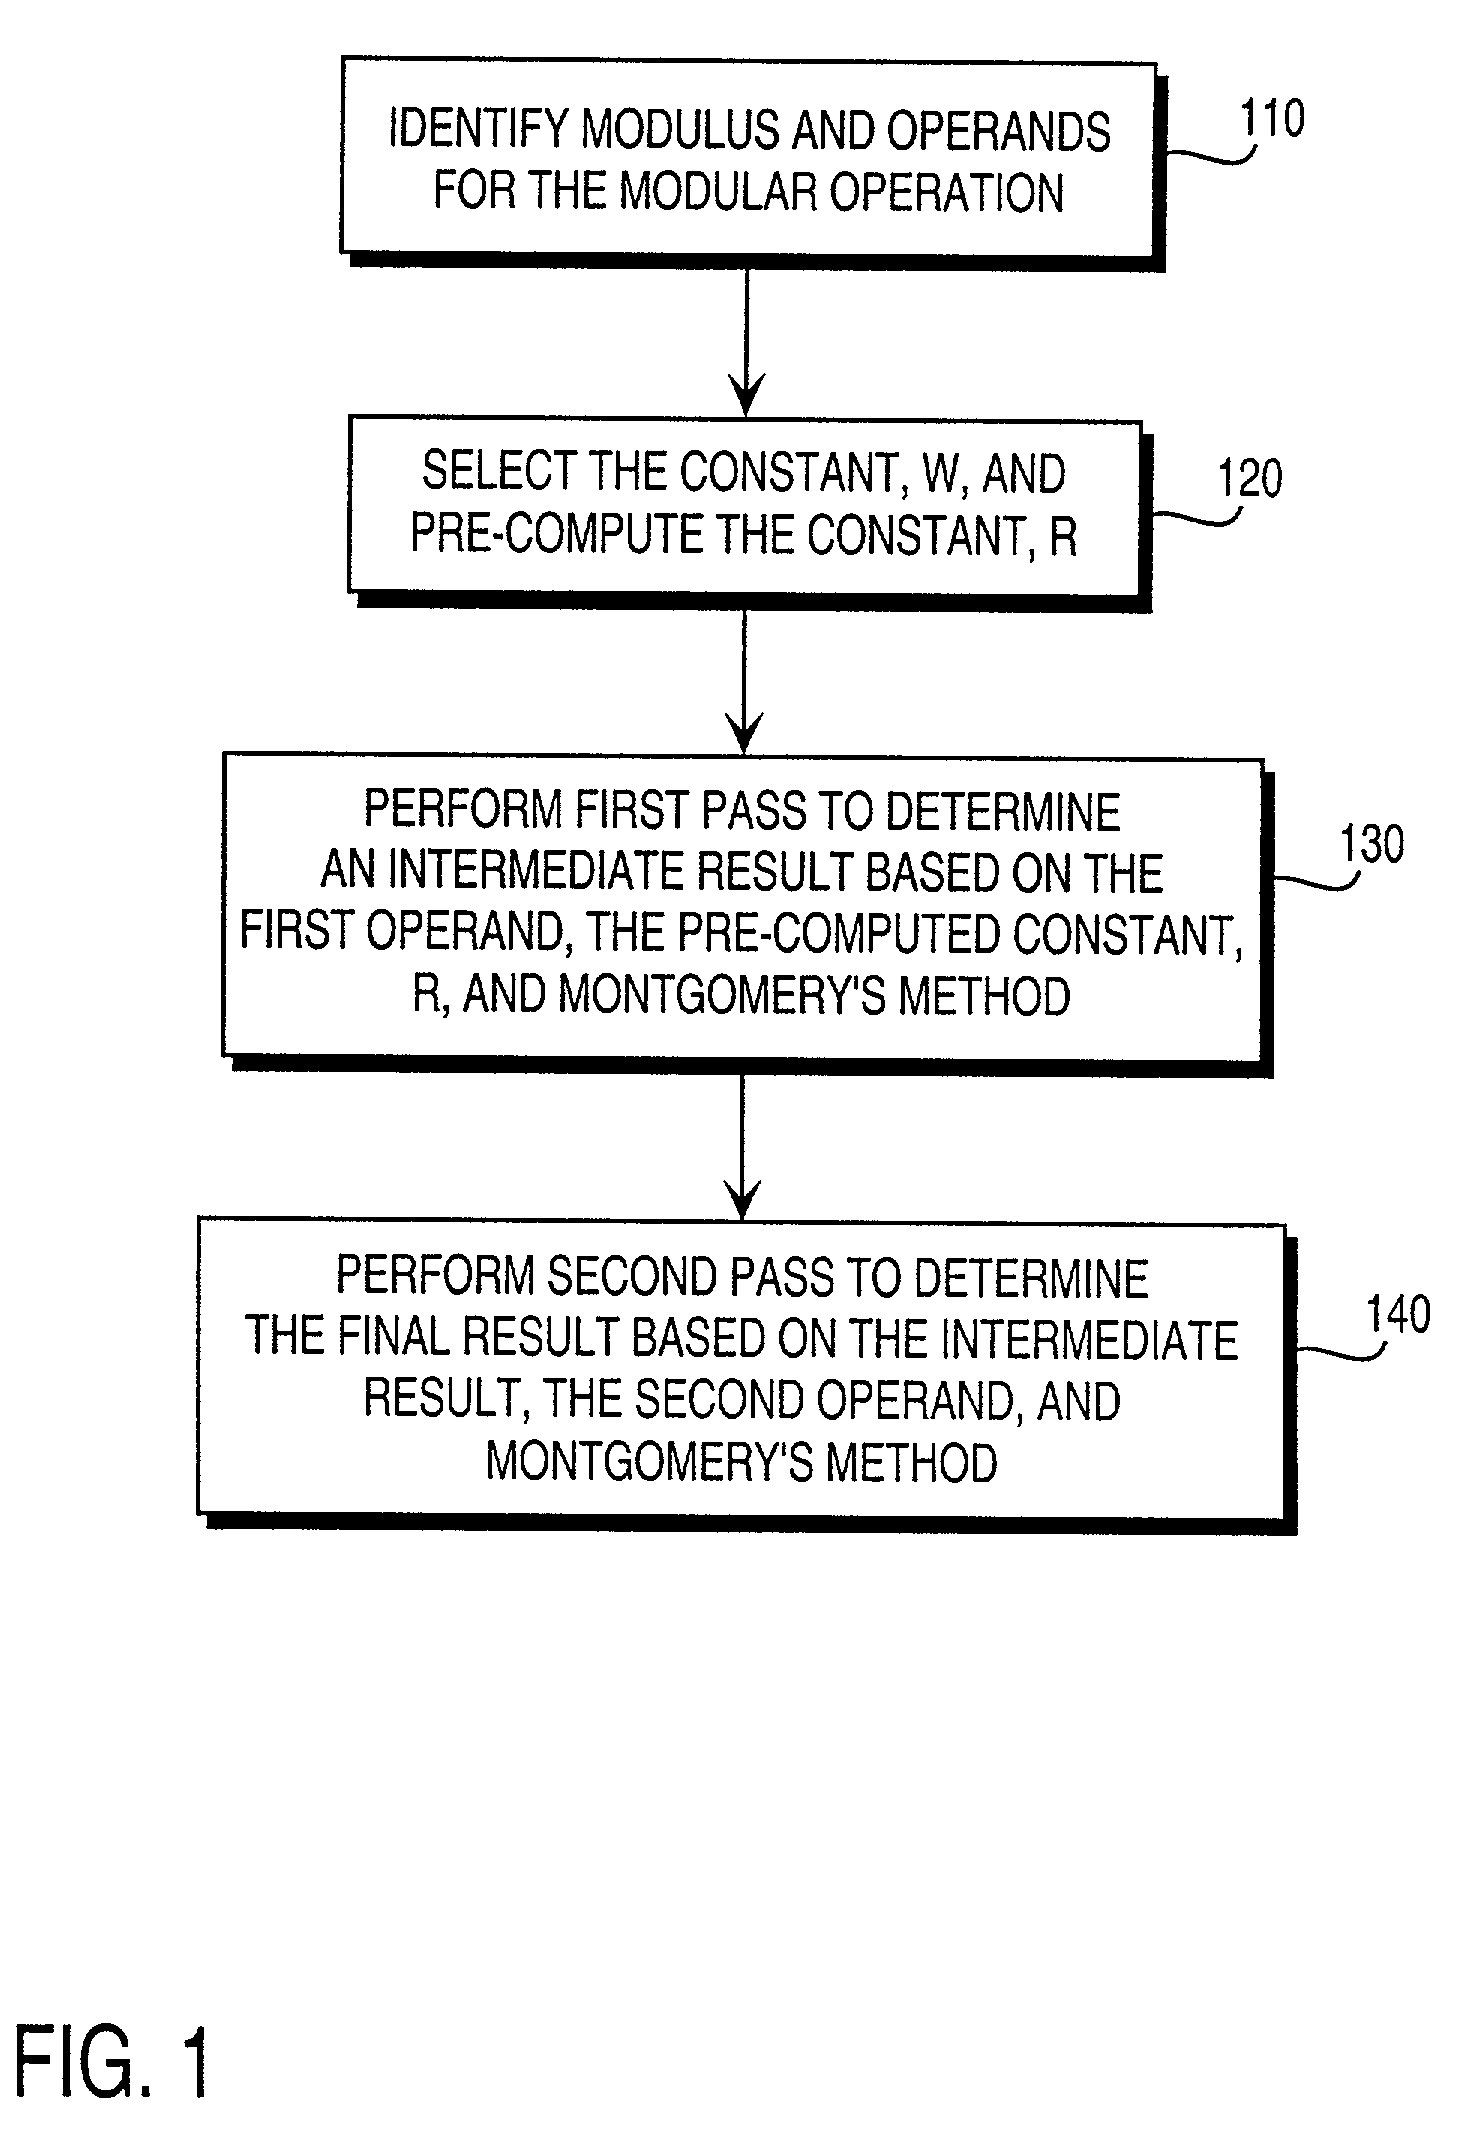 Residue number system based pre-computation and dual-pass arithmetic modular operation approach to implement encryption protocols efficiently in electronic integrated circuits